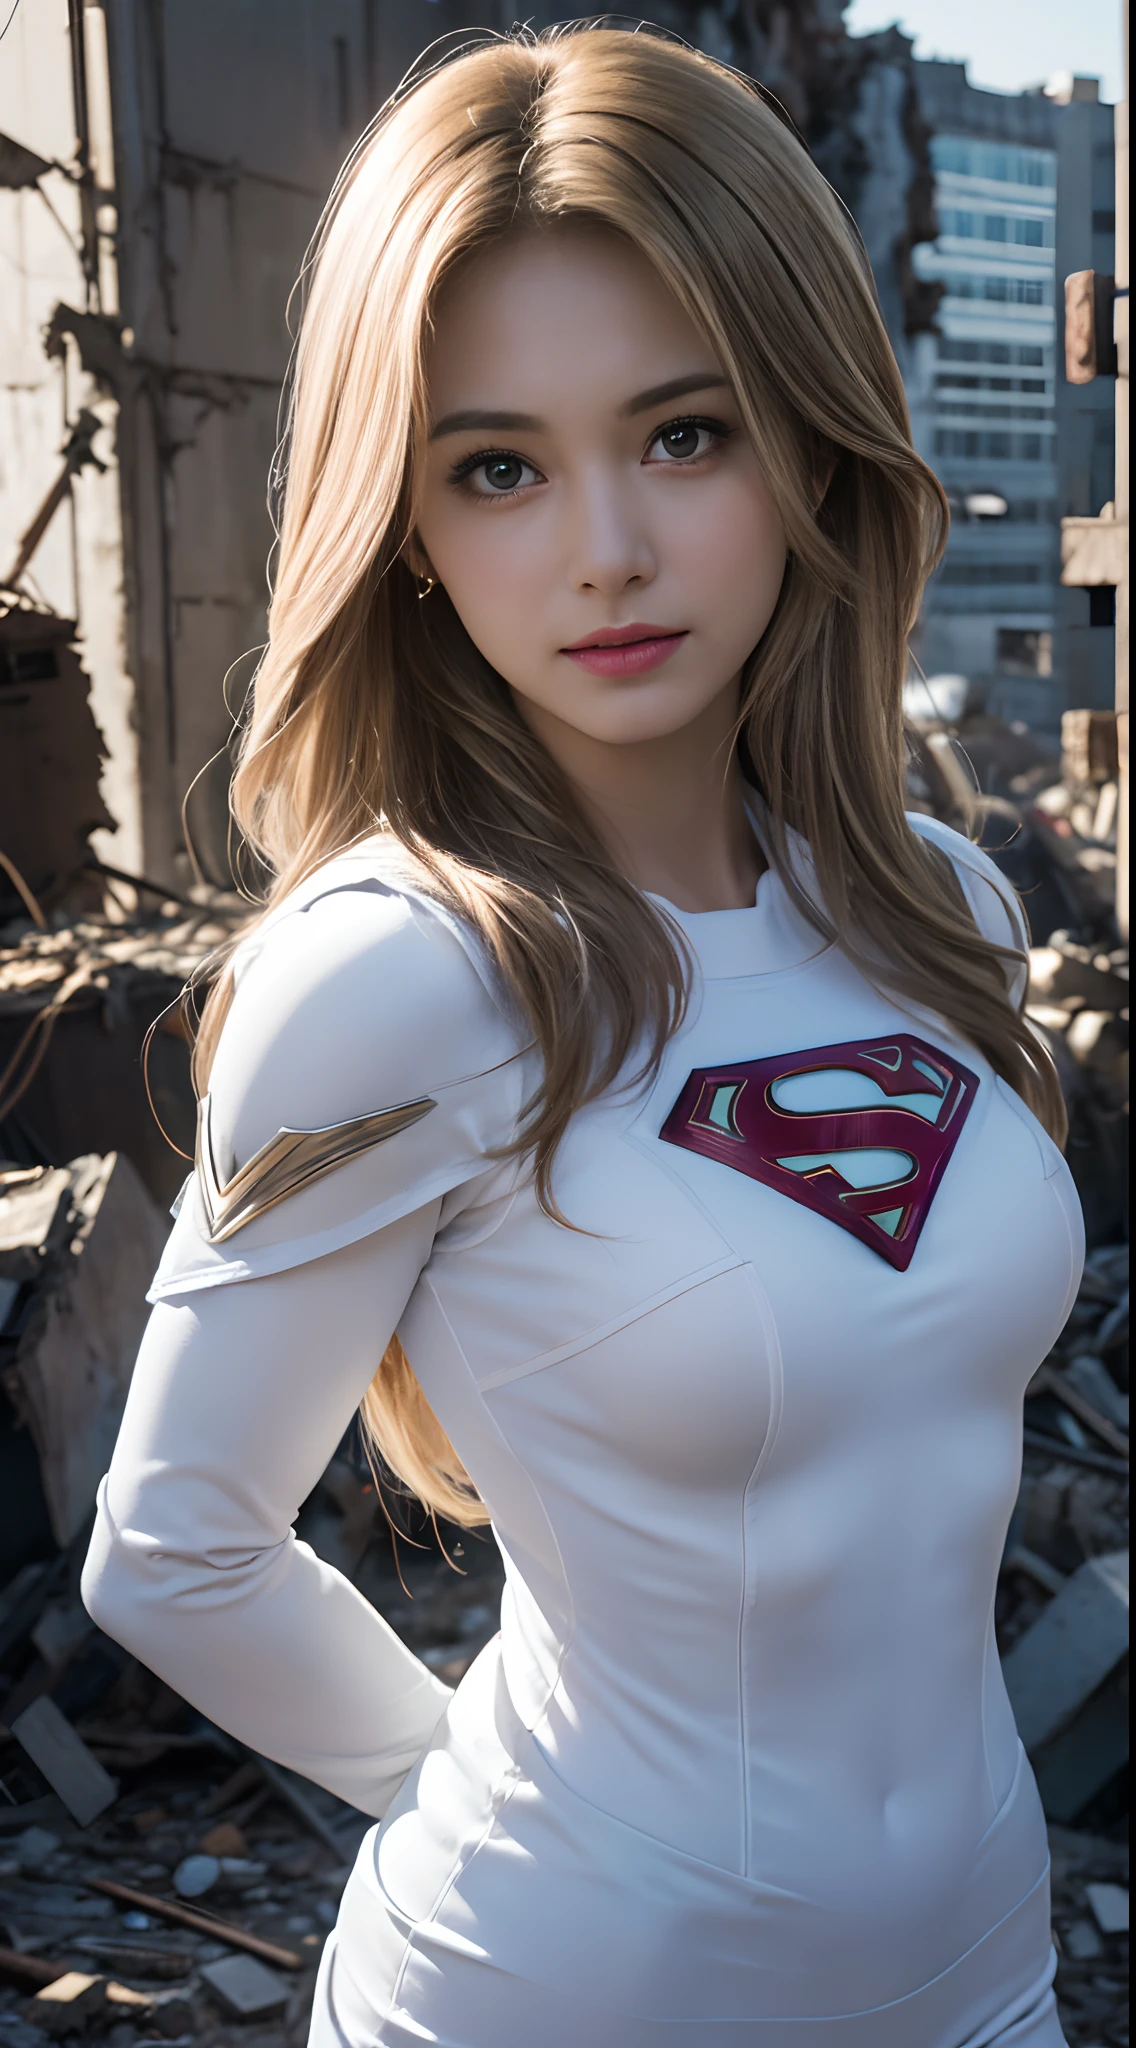 (White Superhero Theme Supergirl),( Apocalyptic city destroyed:1.4),(superchica:1.4), (gray white hair ),More detailed 8K.unreal engine:1.4,UHD,La Best Quality:1.4, photorealistic:1.4, skin texture:1.4, Masterpiece:1.8,first work, Best Quality,object object], (detailed face features:1.3), (Detailed hands:1.4),